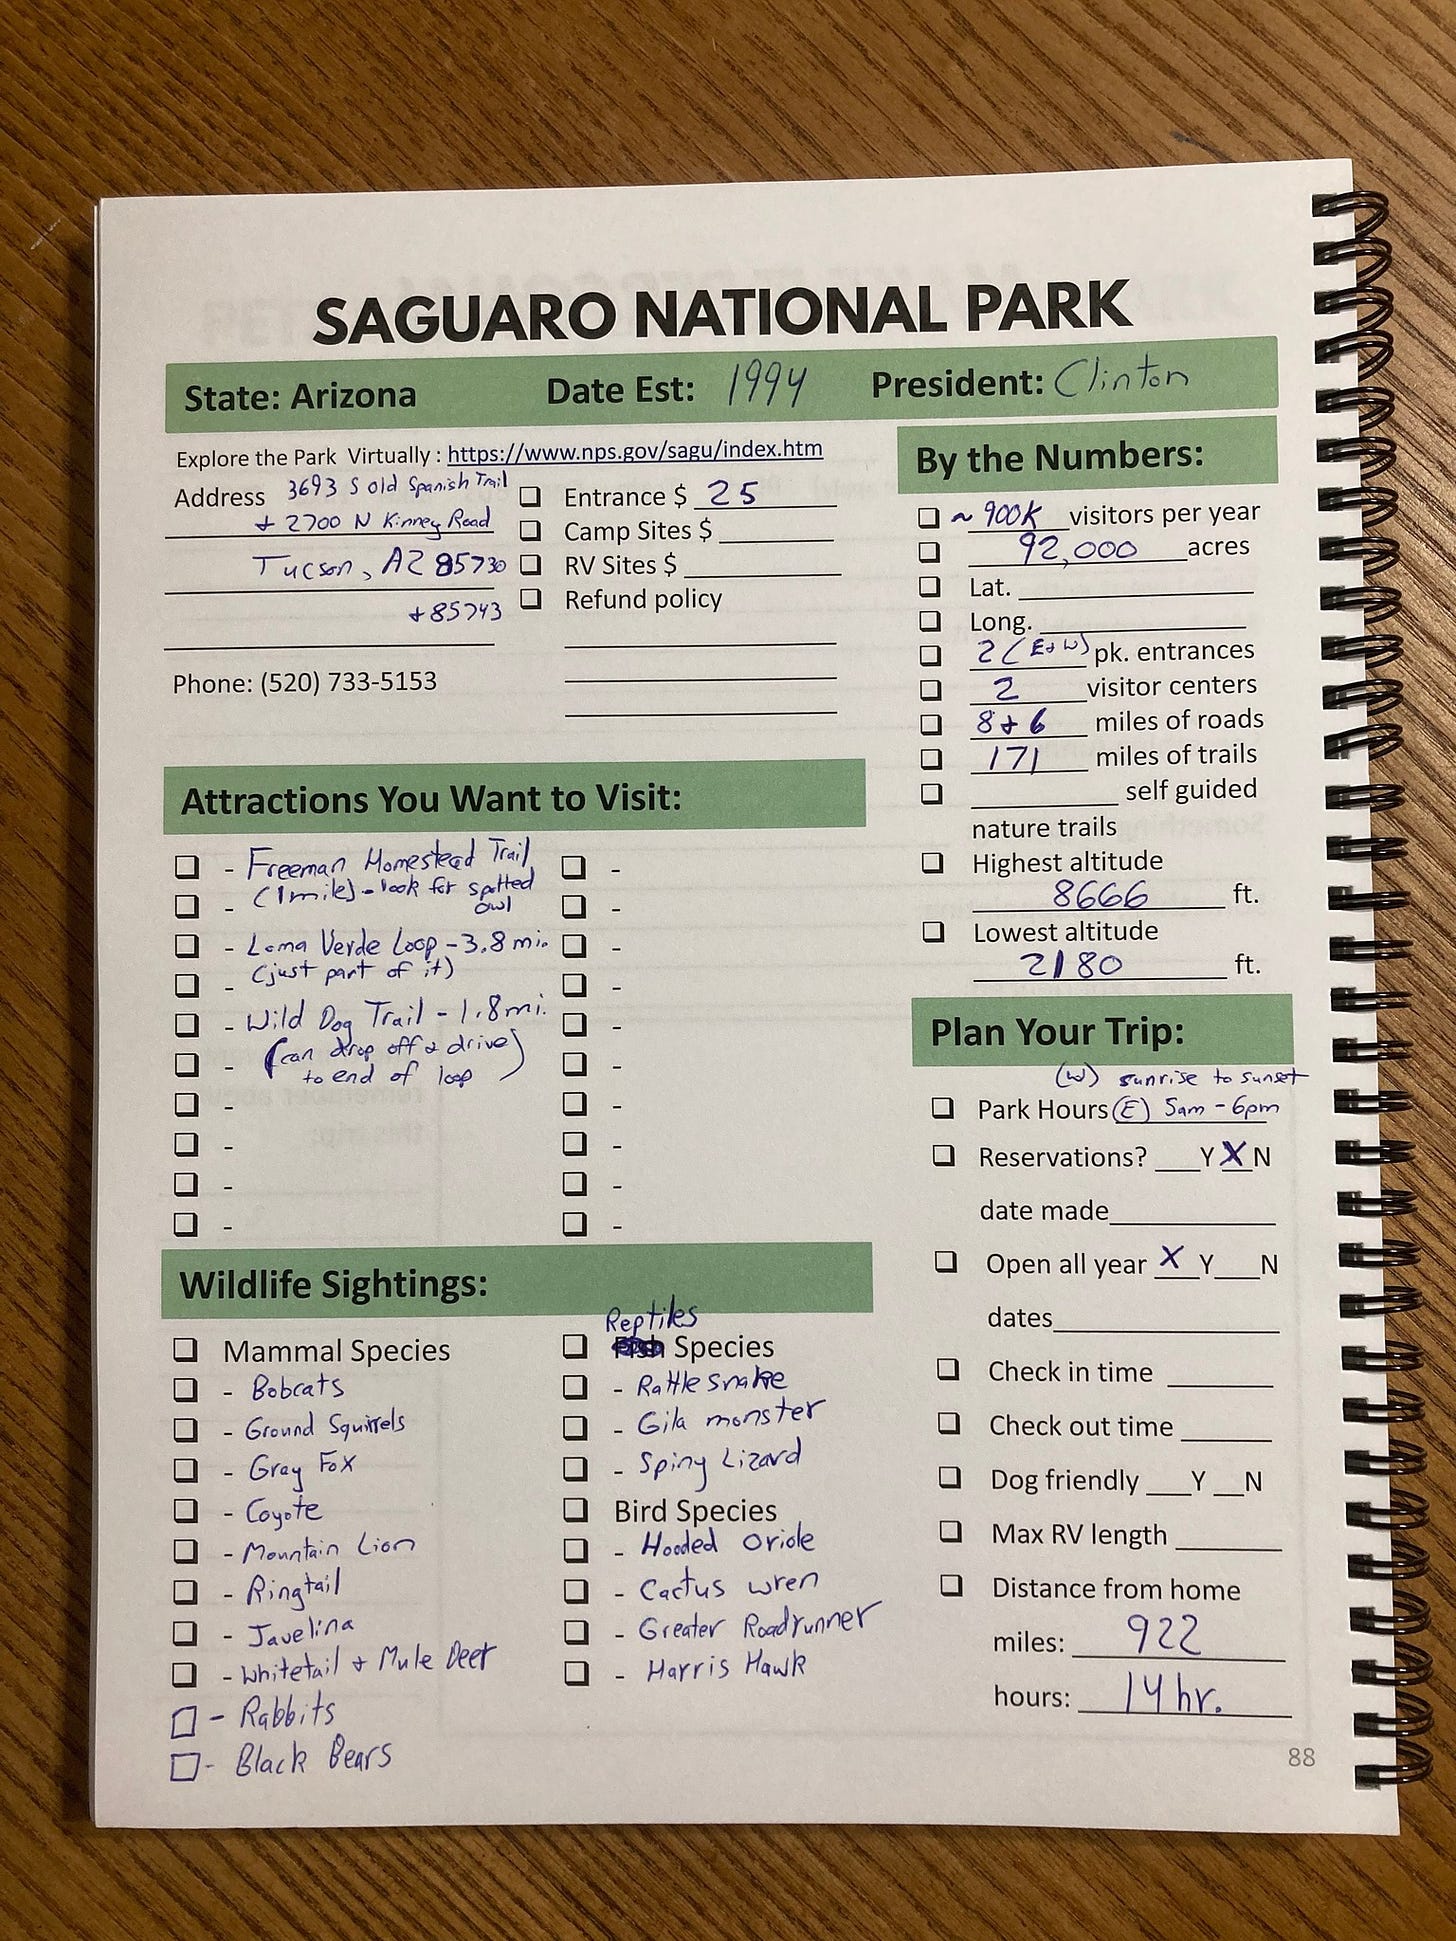 May be an image of calendar, park and text that says 'SAGUARO NATIONAL PARK State: Arizona Date Est: Prsdent: Explore Address Virtually Entrance$ Sites 85730 +85743 Numbers: Refund policy 900k visitors 92,000 Lat. Long year acres Want entrances visitor centers Attractions Freeman Momestkad (Imikj Loma Verde Cjust wild miles guided nature trails Highest altitude Lowest altitude 80 Plan Your (W) Sunrise Û) Reservations? 6pm Wildlife Sightings: date made year Species Mammal Species Bobcats Ground Squitels FOX Coyote Monntain Ci6n dates Checki time out time Dog friendly Spiny Lizard Bird Species Hodded oride Cactus wren Greater Roadrunner Harri Hawk Javelina -Whitetail Rabbit Black Bears Distance from home 922 miles: hours: 88'